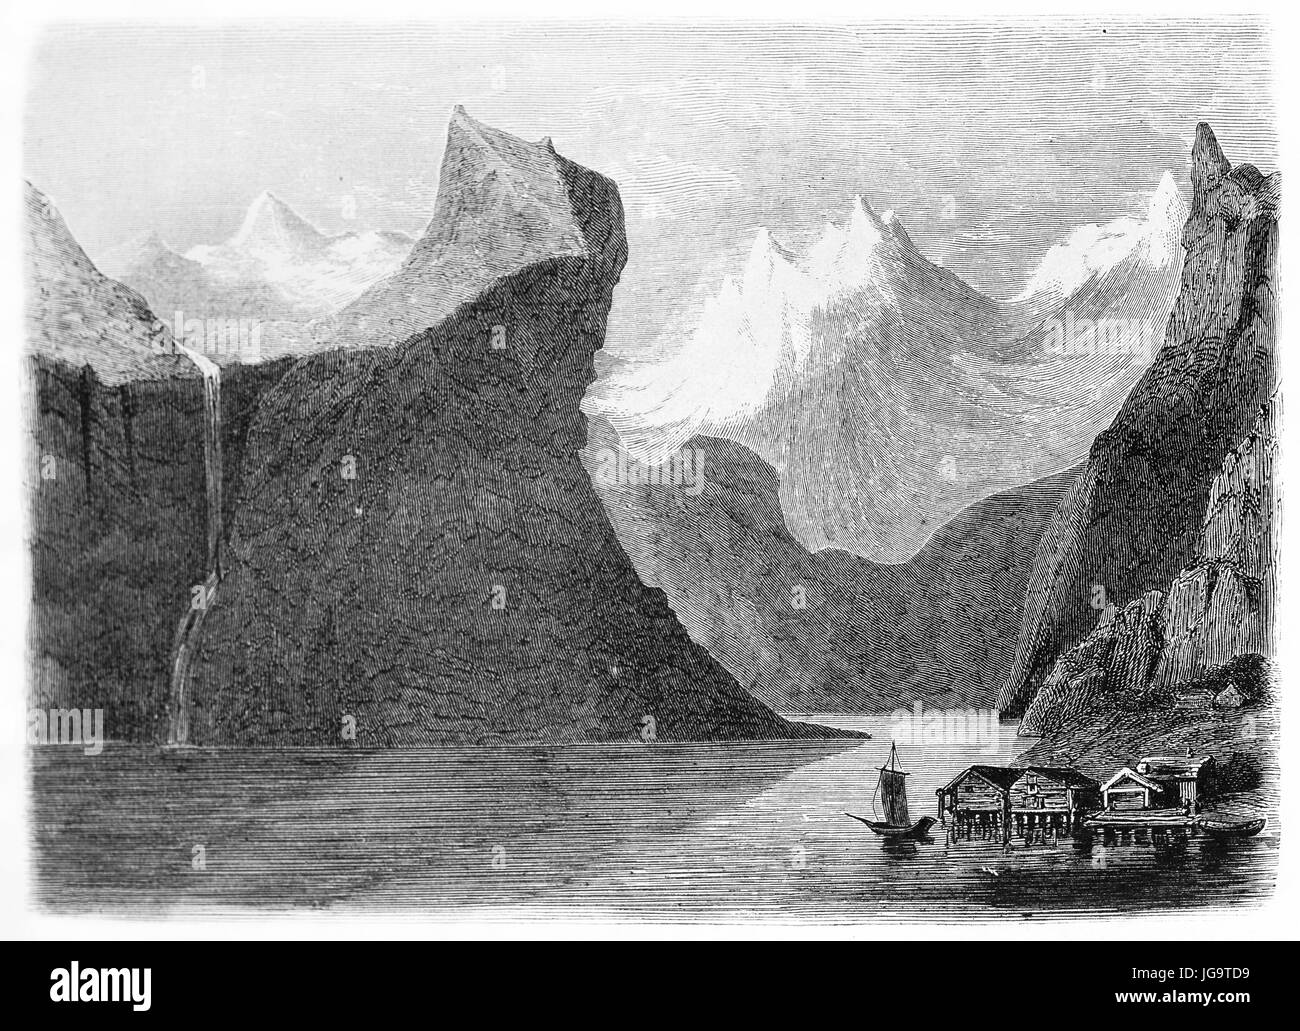 Small isolated wooden houses fronting huge Veblunsgnoeset fjord, Norway. Ancient etching style art by Saint-Blaise, published on Le Tour du Monde 1861 Stock Photo